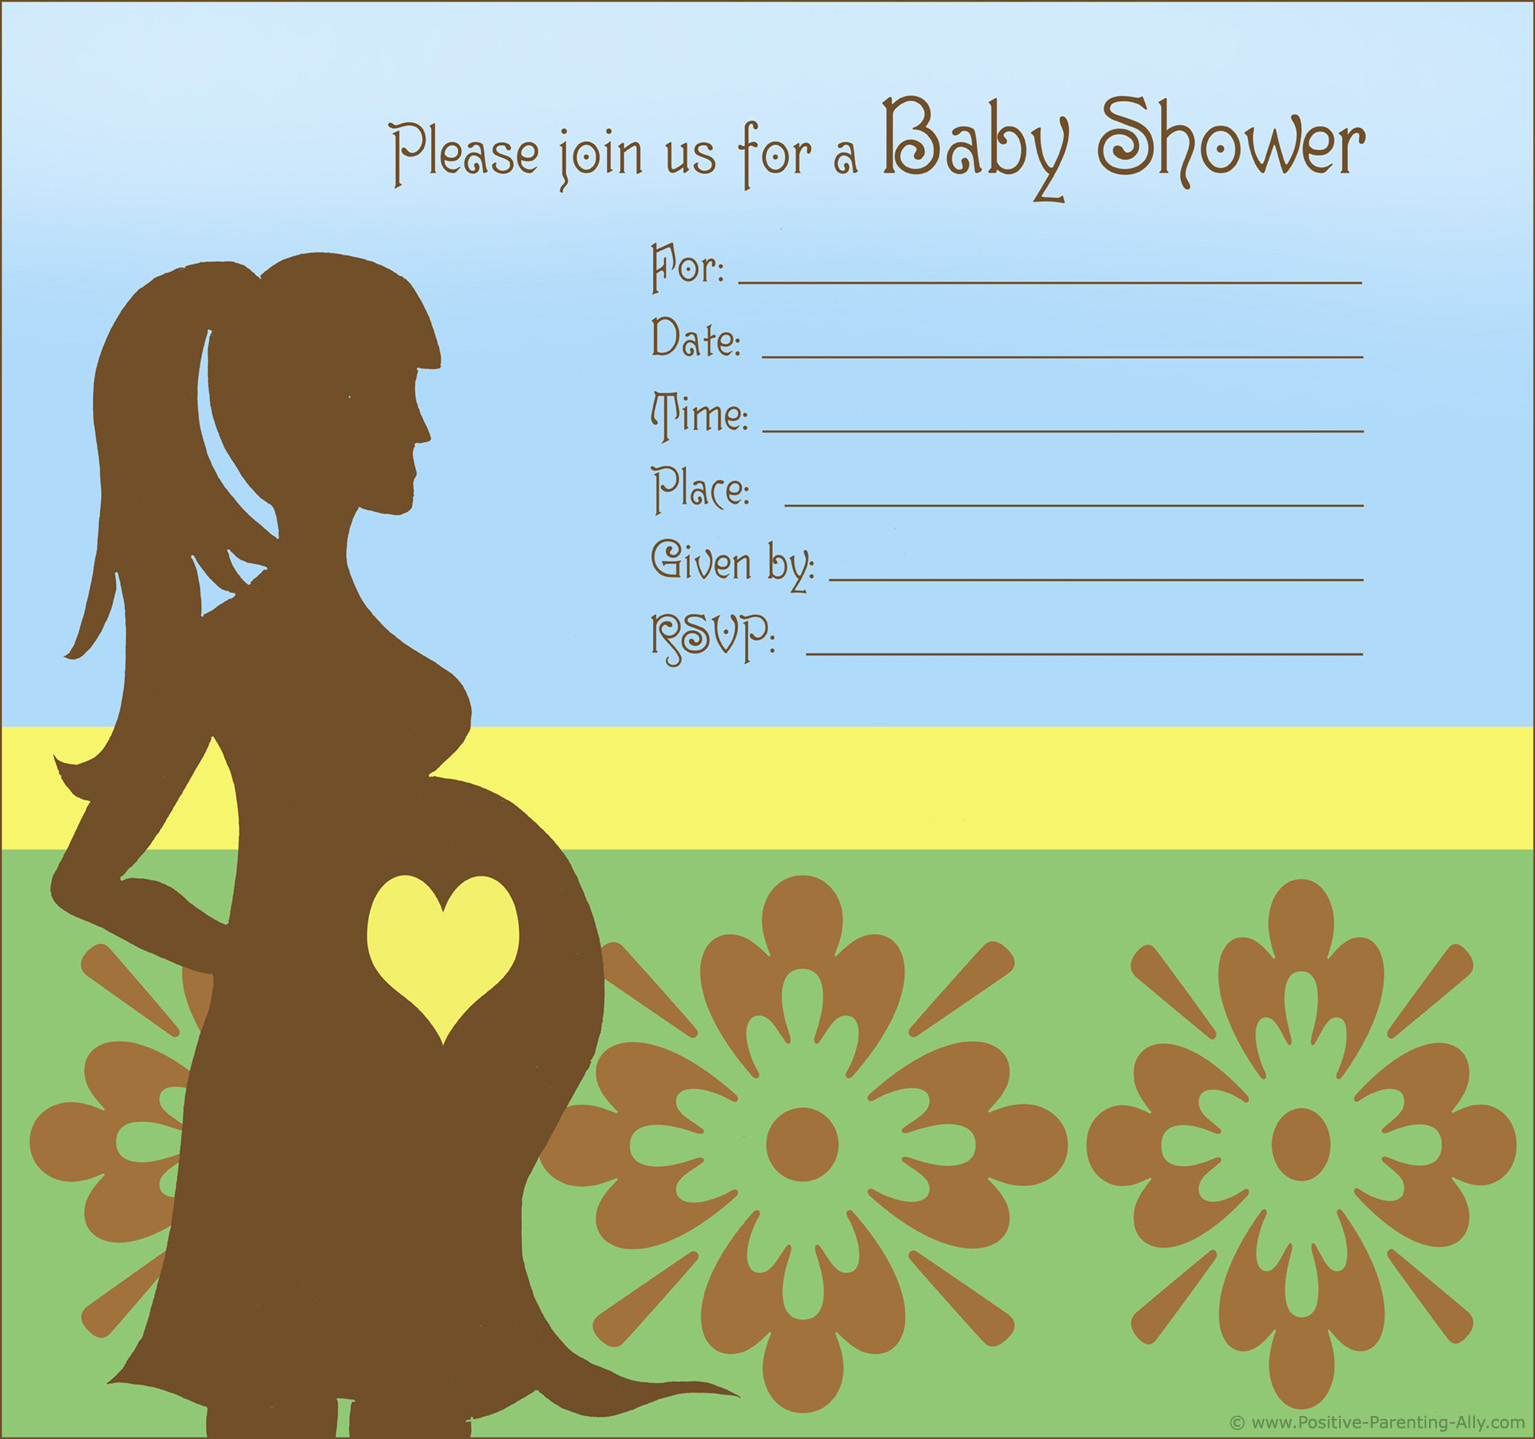 Free Printable Baby Shower Invitations in High Quality ...